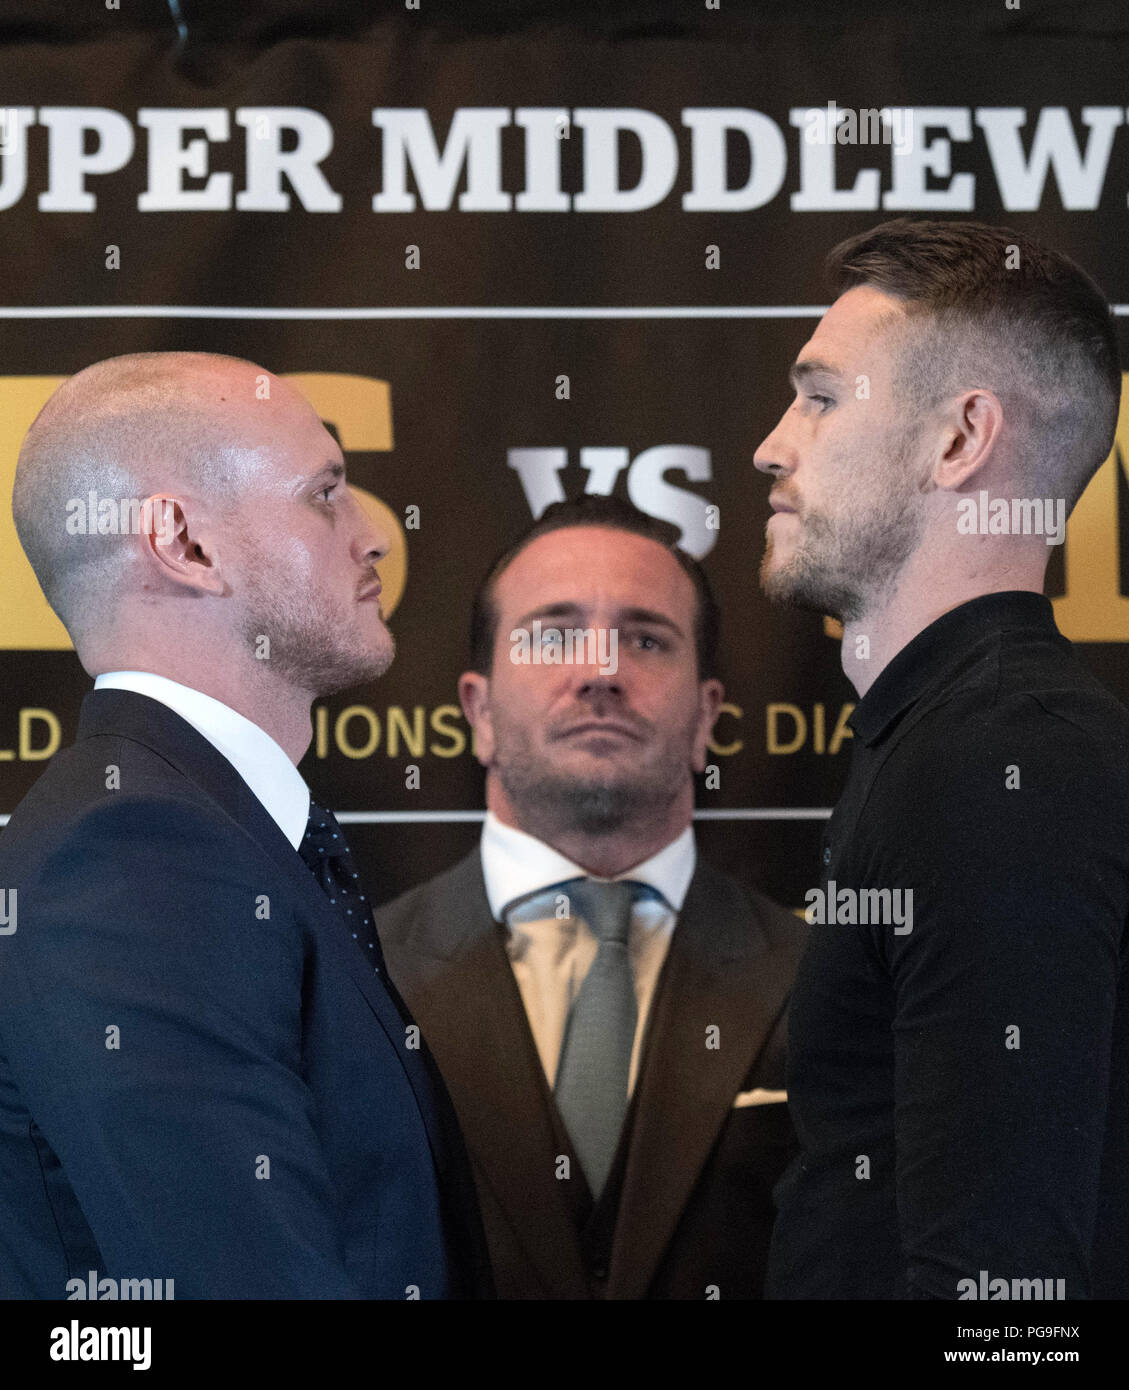 WBA Super World Champion George Groves (left) and Callum Smith (right) attend a World Boxing Super Series press conference at the Landmark Hotel in London today with promoter Kalle Sauerland (centre) ahead of their Muhammad Ali Trophy Super Middleweight Final on September 28 at the King Abdullah Sports City in Jeddah, Saudi Arabia. PRESS ASSOCIATION Photo. Picture date: Friday August 24, 2018. See PA story BOXING London. Photo credit should read: Stefan Rousseau/PA Wire Stock Photo